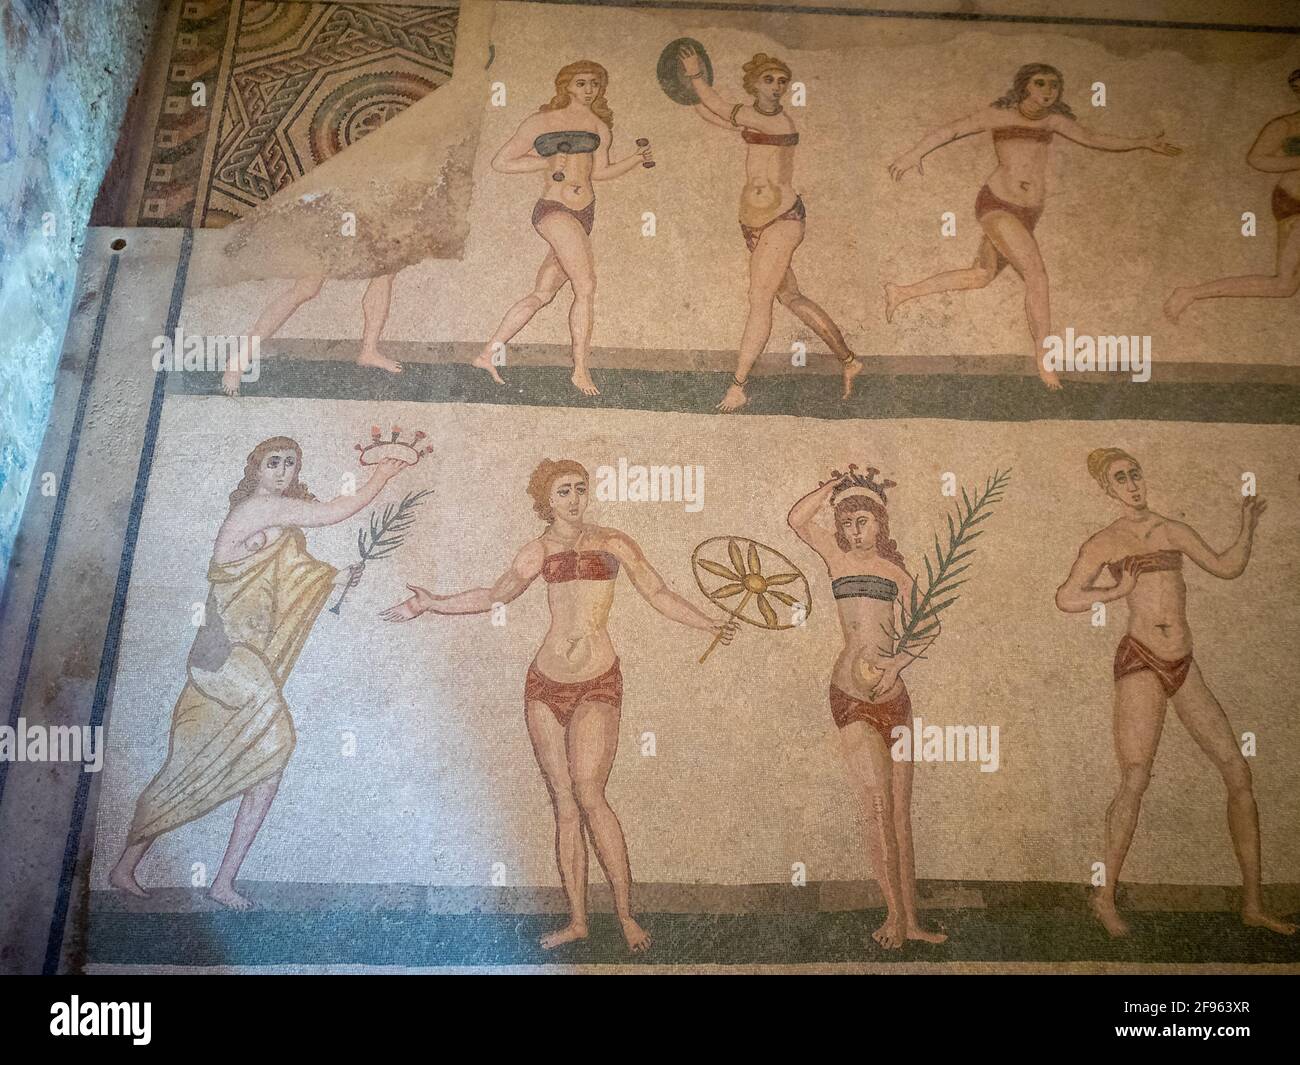 Women playing sports, mosaic detail from the Room with Girls in Bikini, Villa Romana del Casale Stock Photo